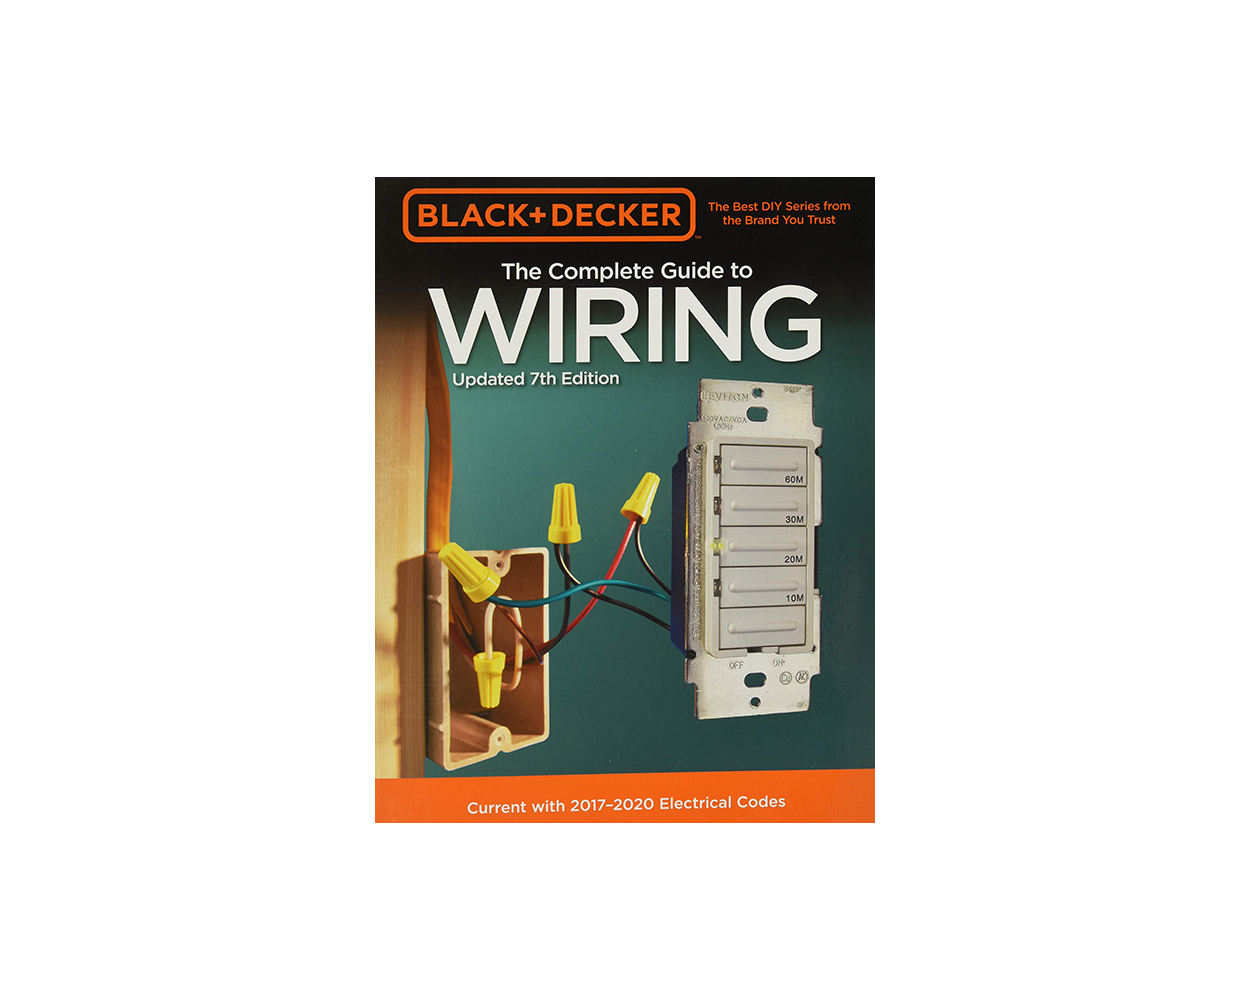 .ca] $2.99 Black & Decker The Complete Guide to Wiring